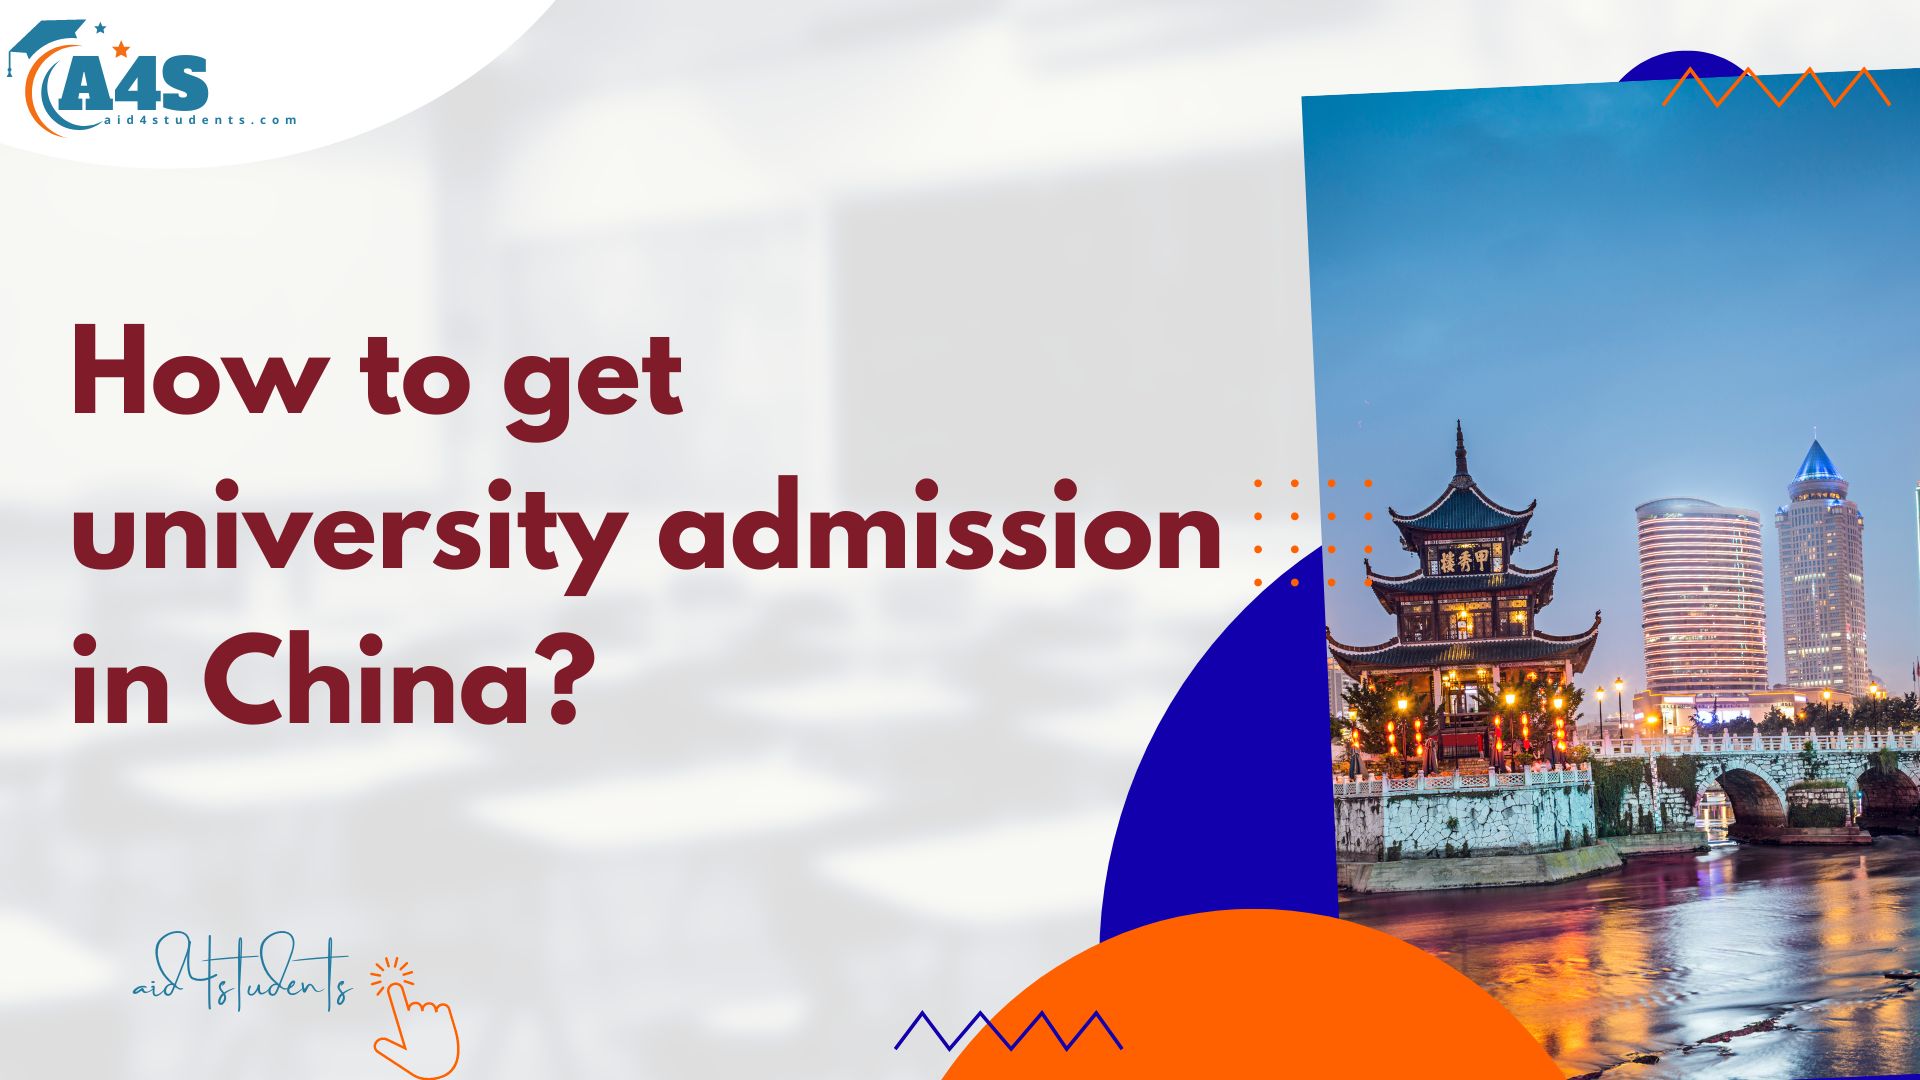 How to get university admission in China: